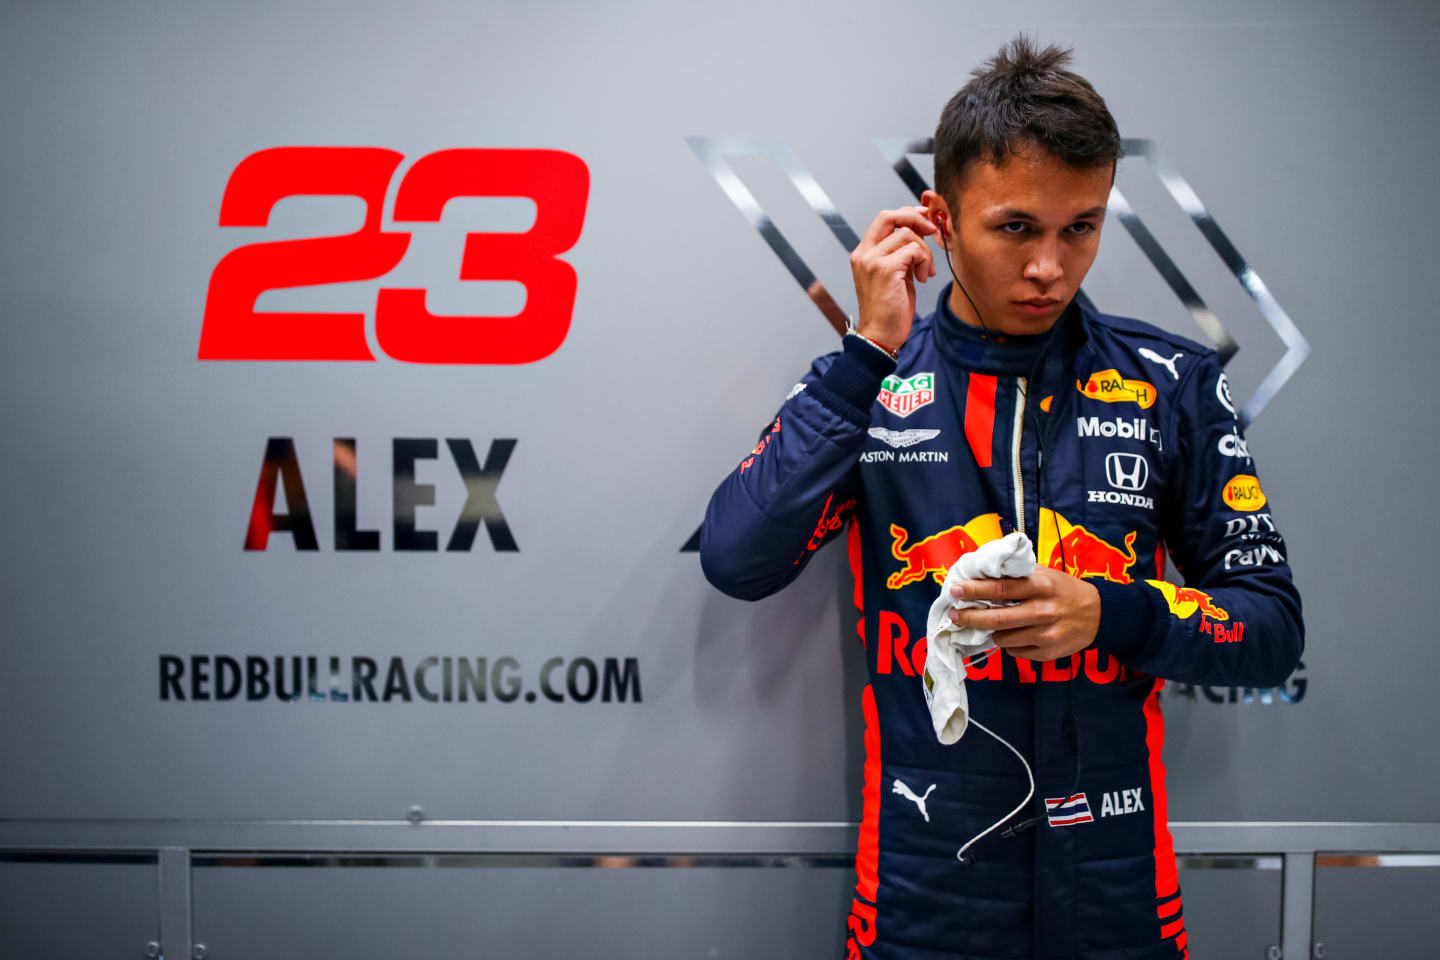 SPA, BELGIUM - AUGUST 28: Alexander Albon of Thailand and Red Bull Racing prepares to drive in the